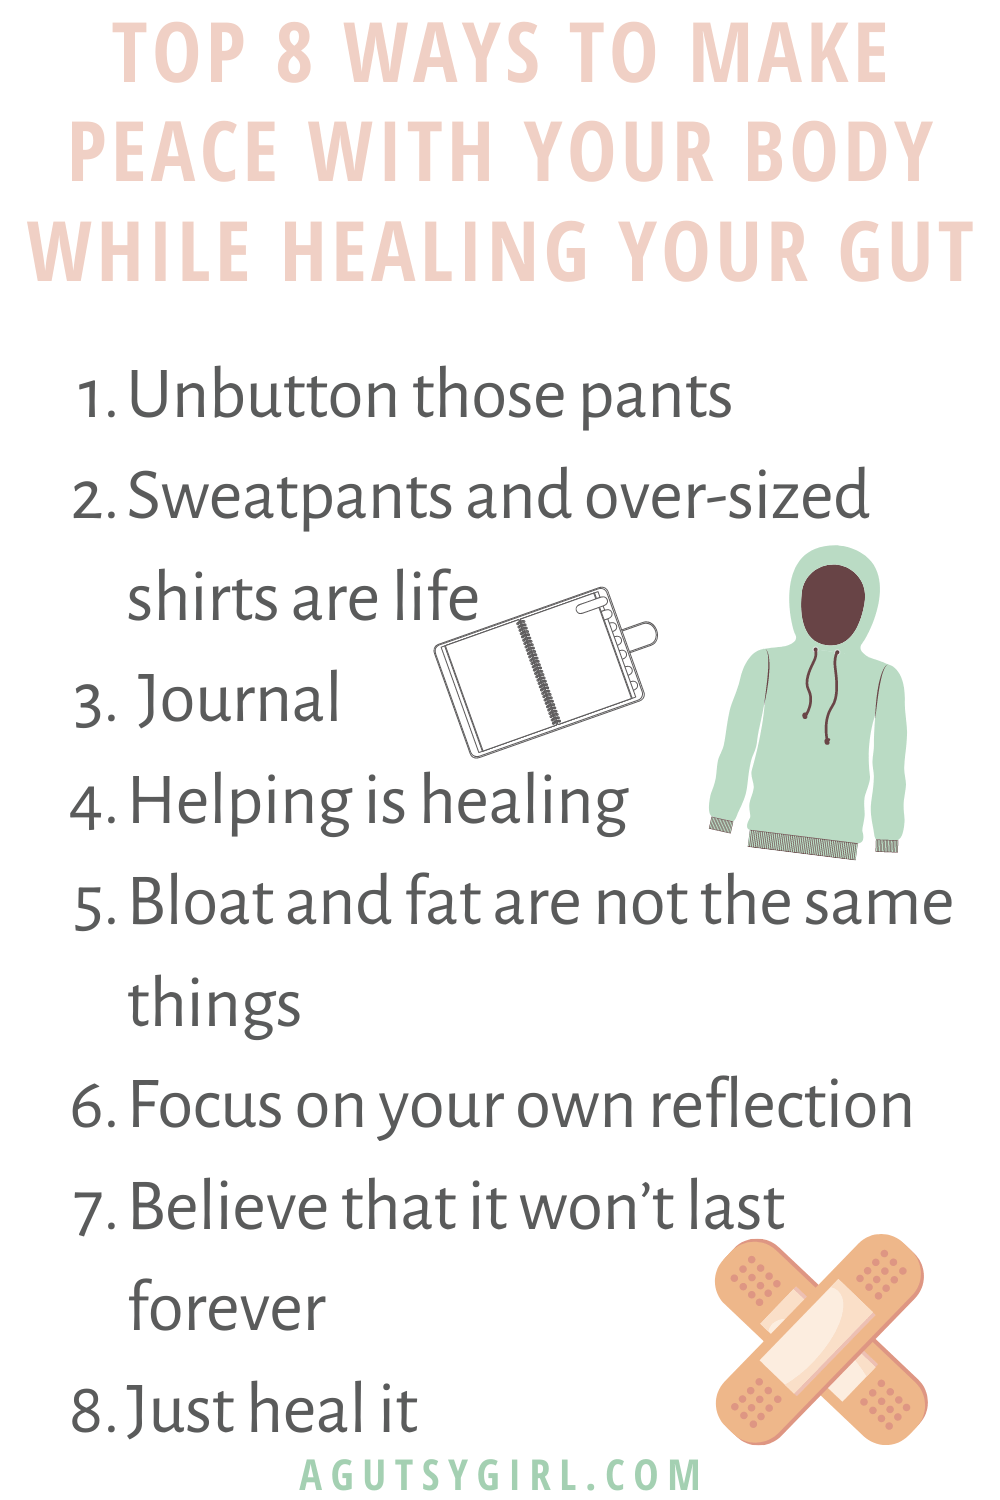 Top 8 Ways to Make Peace with Your Body While Healing Your Gut body positivity agutsygirl.com #guthealth #bodypositivity #healthyliving